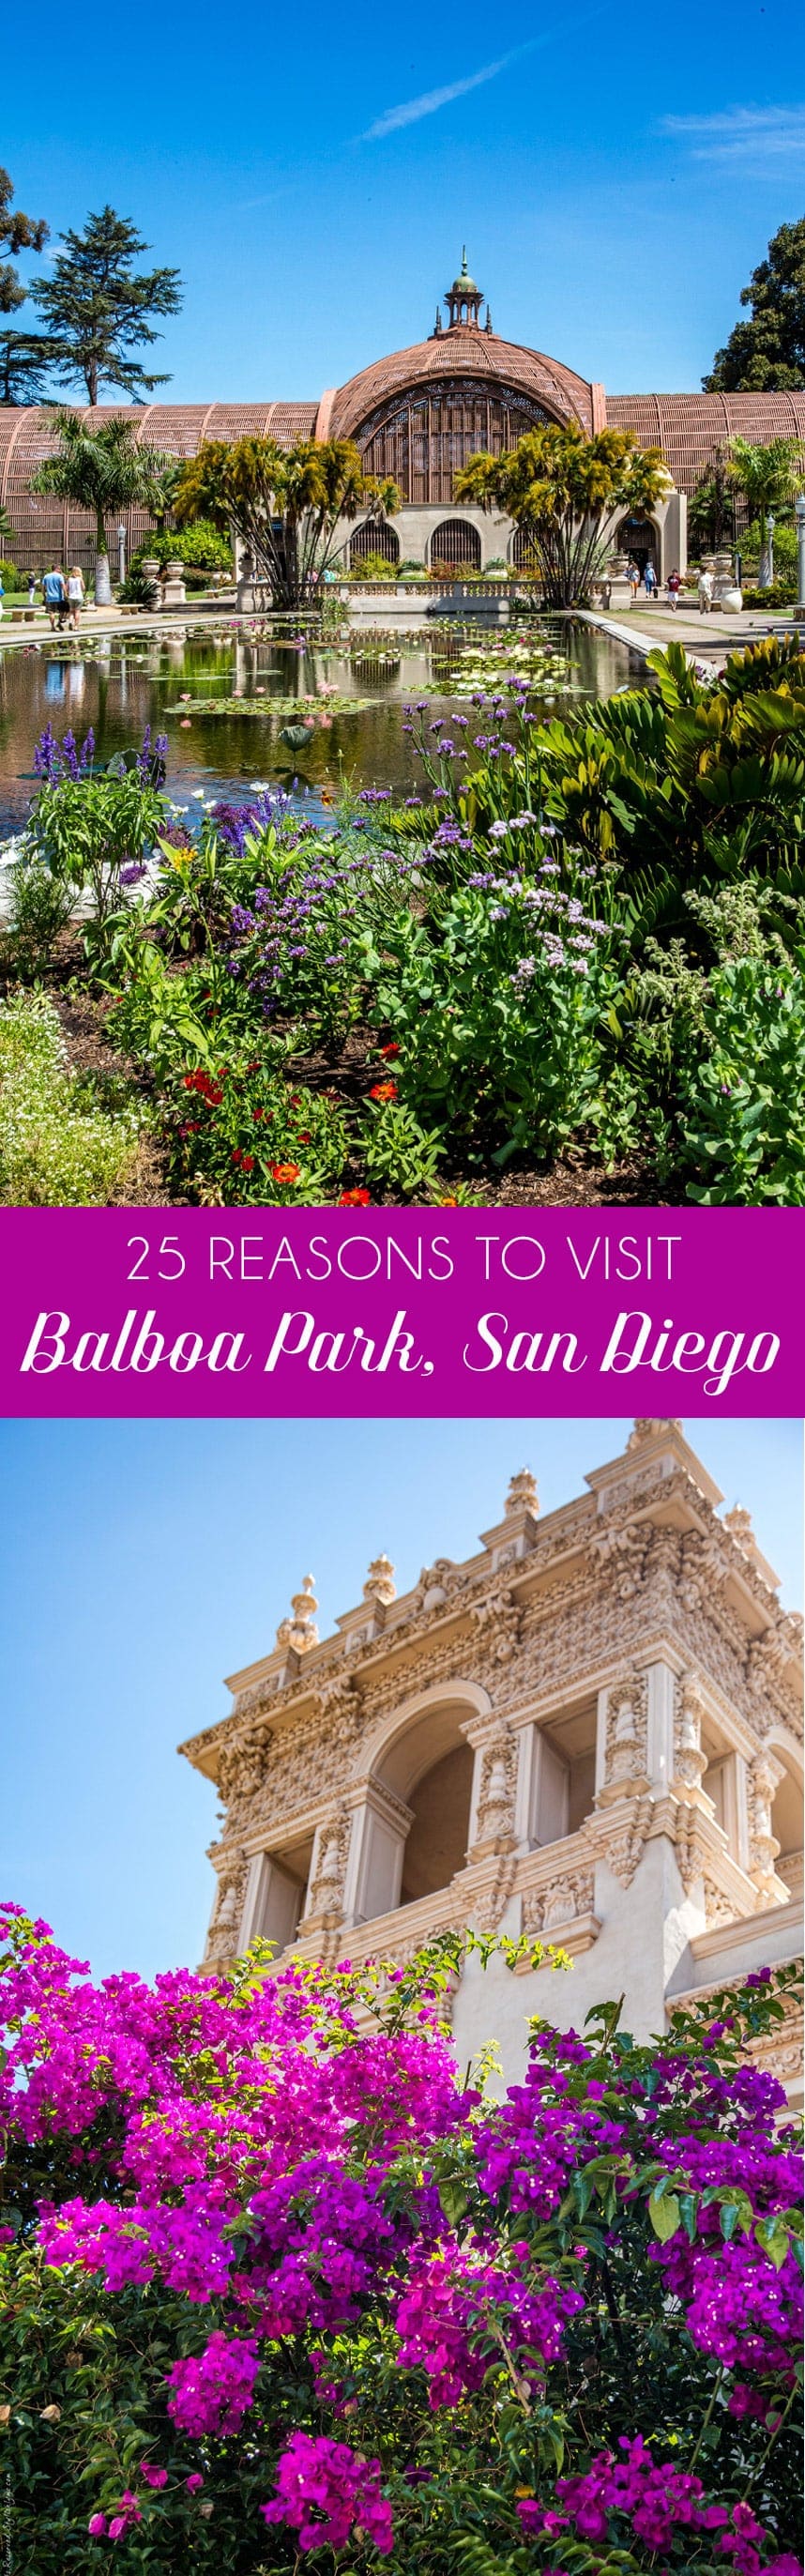 25 Reasons to visit Balboa Park San Diego- Visit Stylishlyme.com to read the 25 Reasons Why You Need to Visit Balboa Park San Diego!